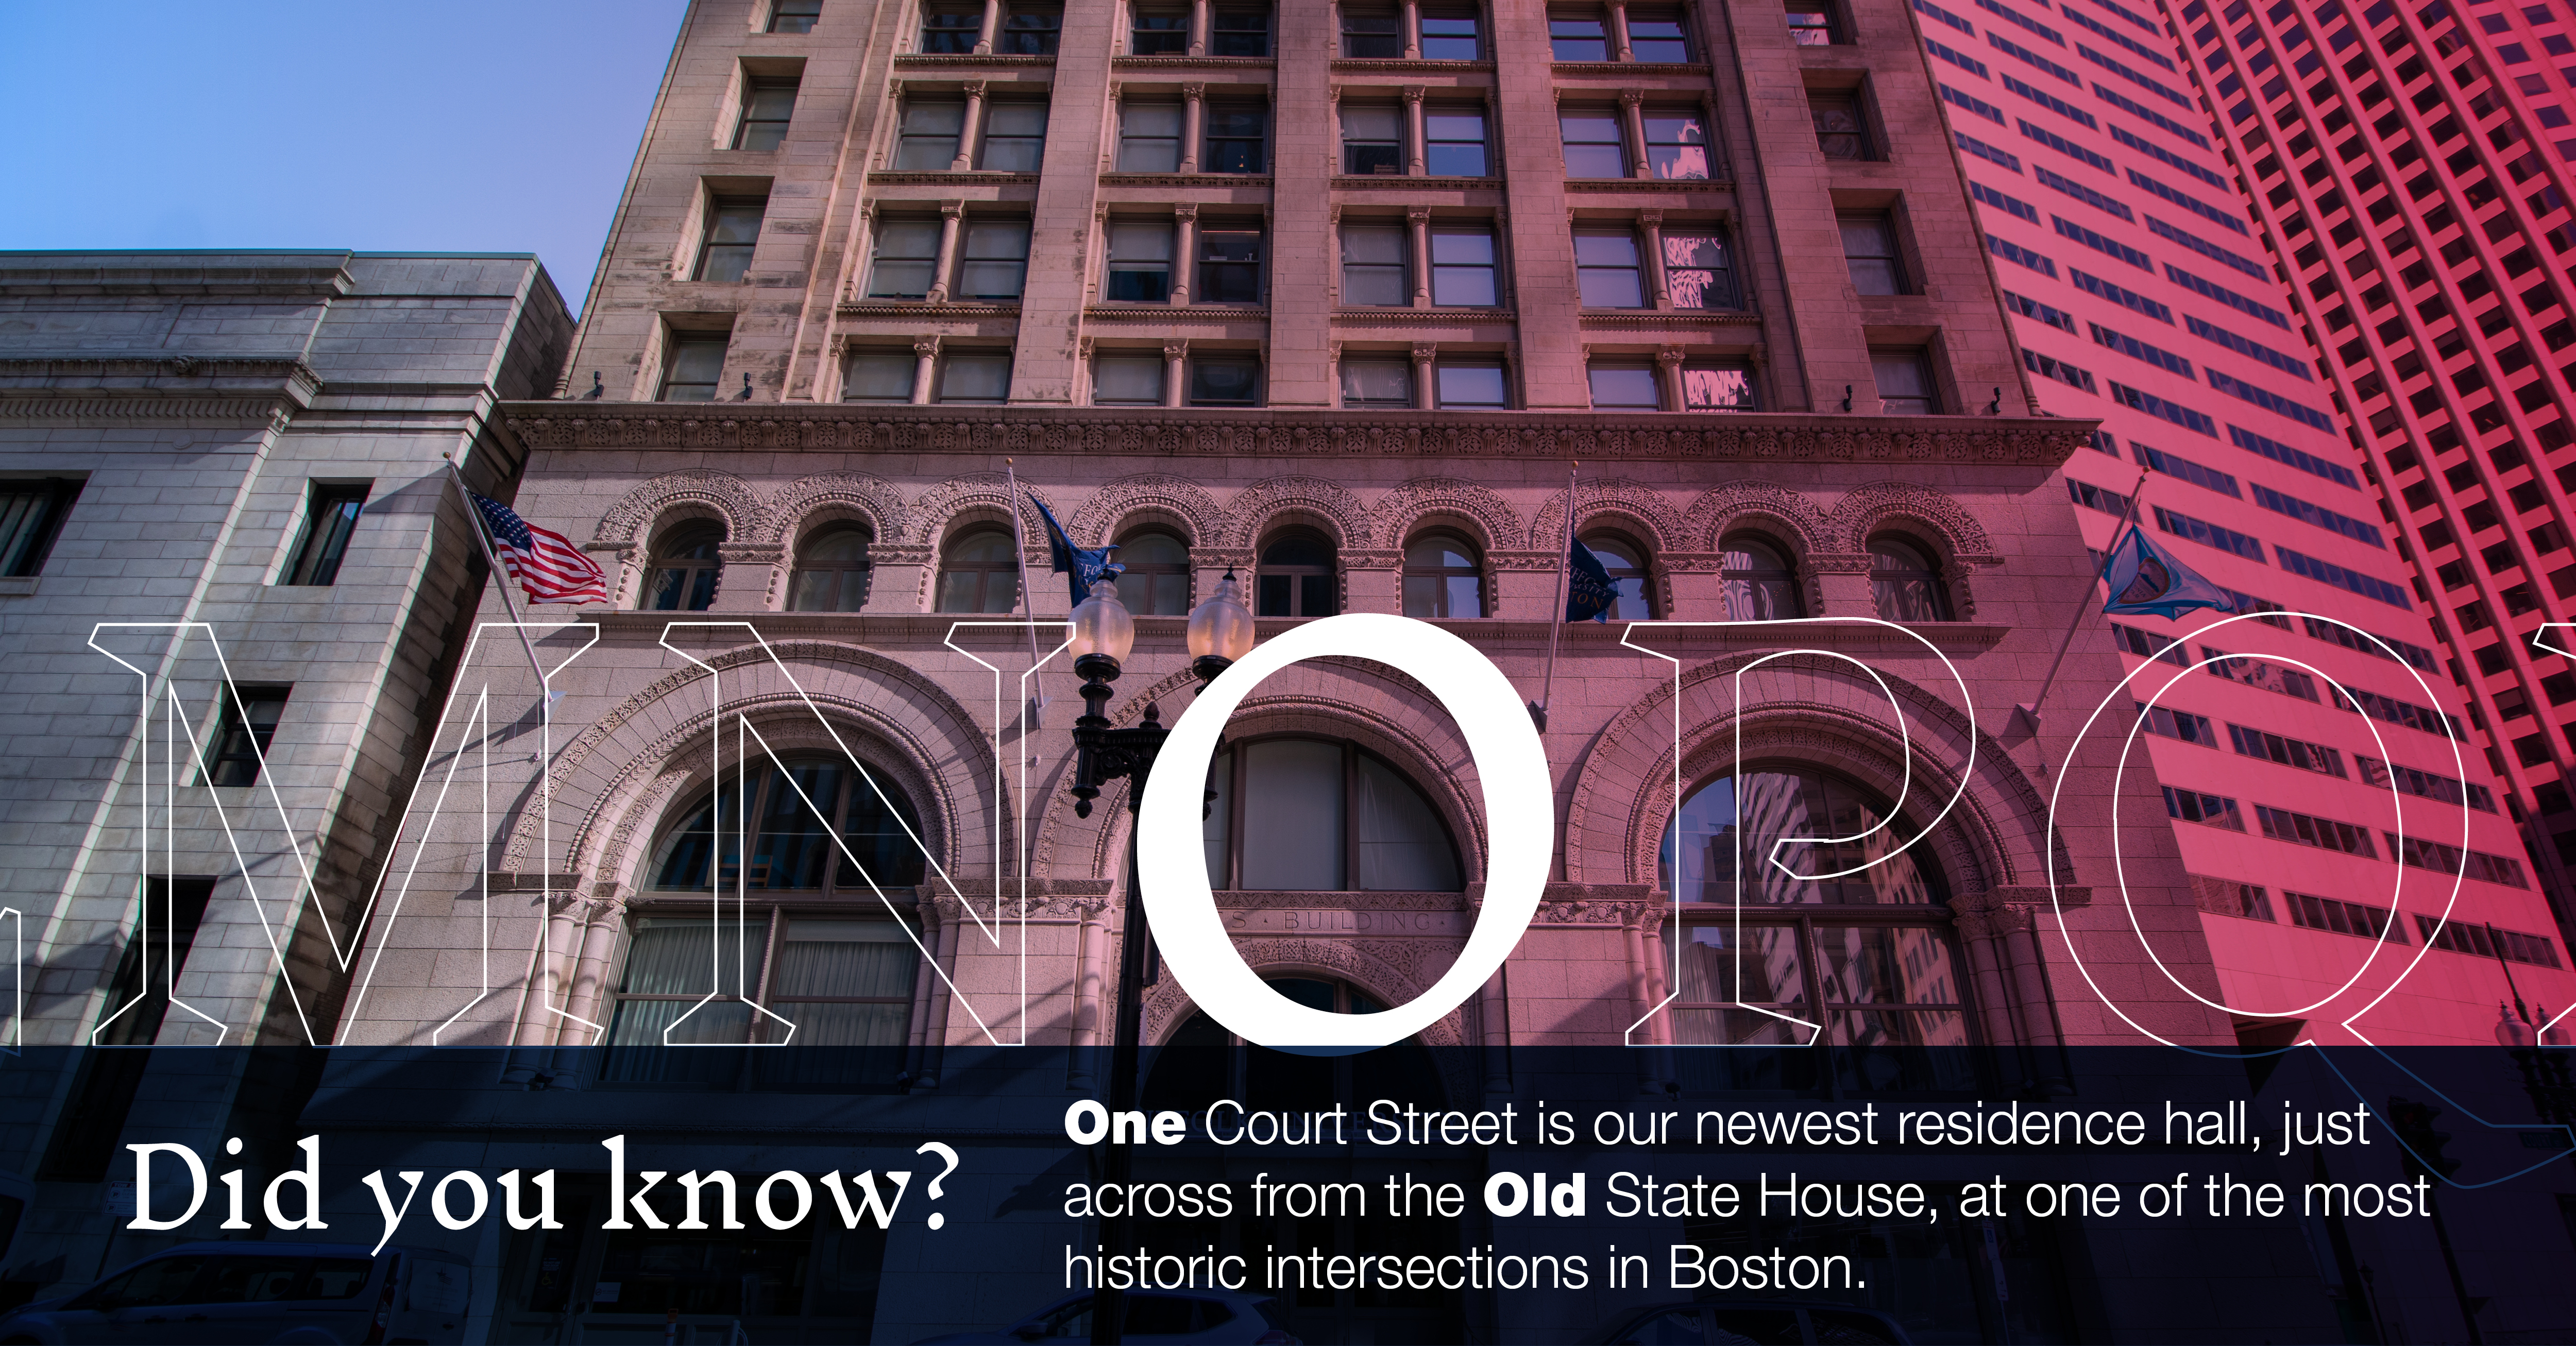 O: [image of One Court Street building]: Did you know One Court Street is our newest residence hall, just across from the Old State House, at one of the most historic intersections in Boston.